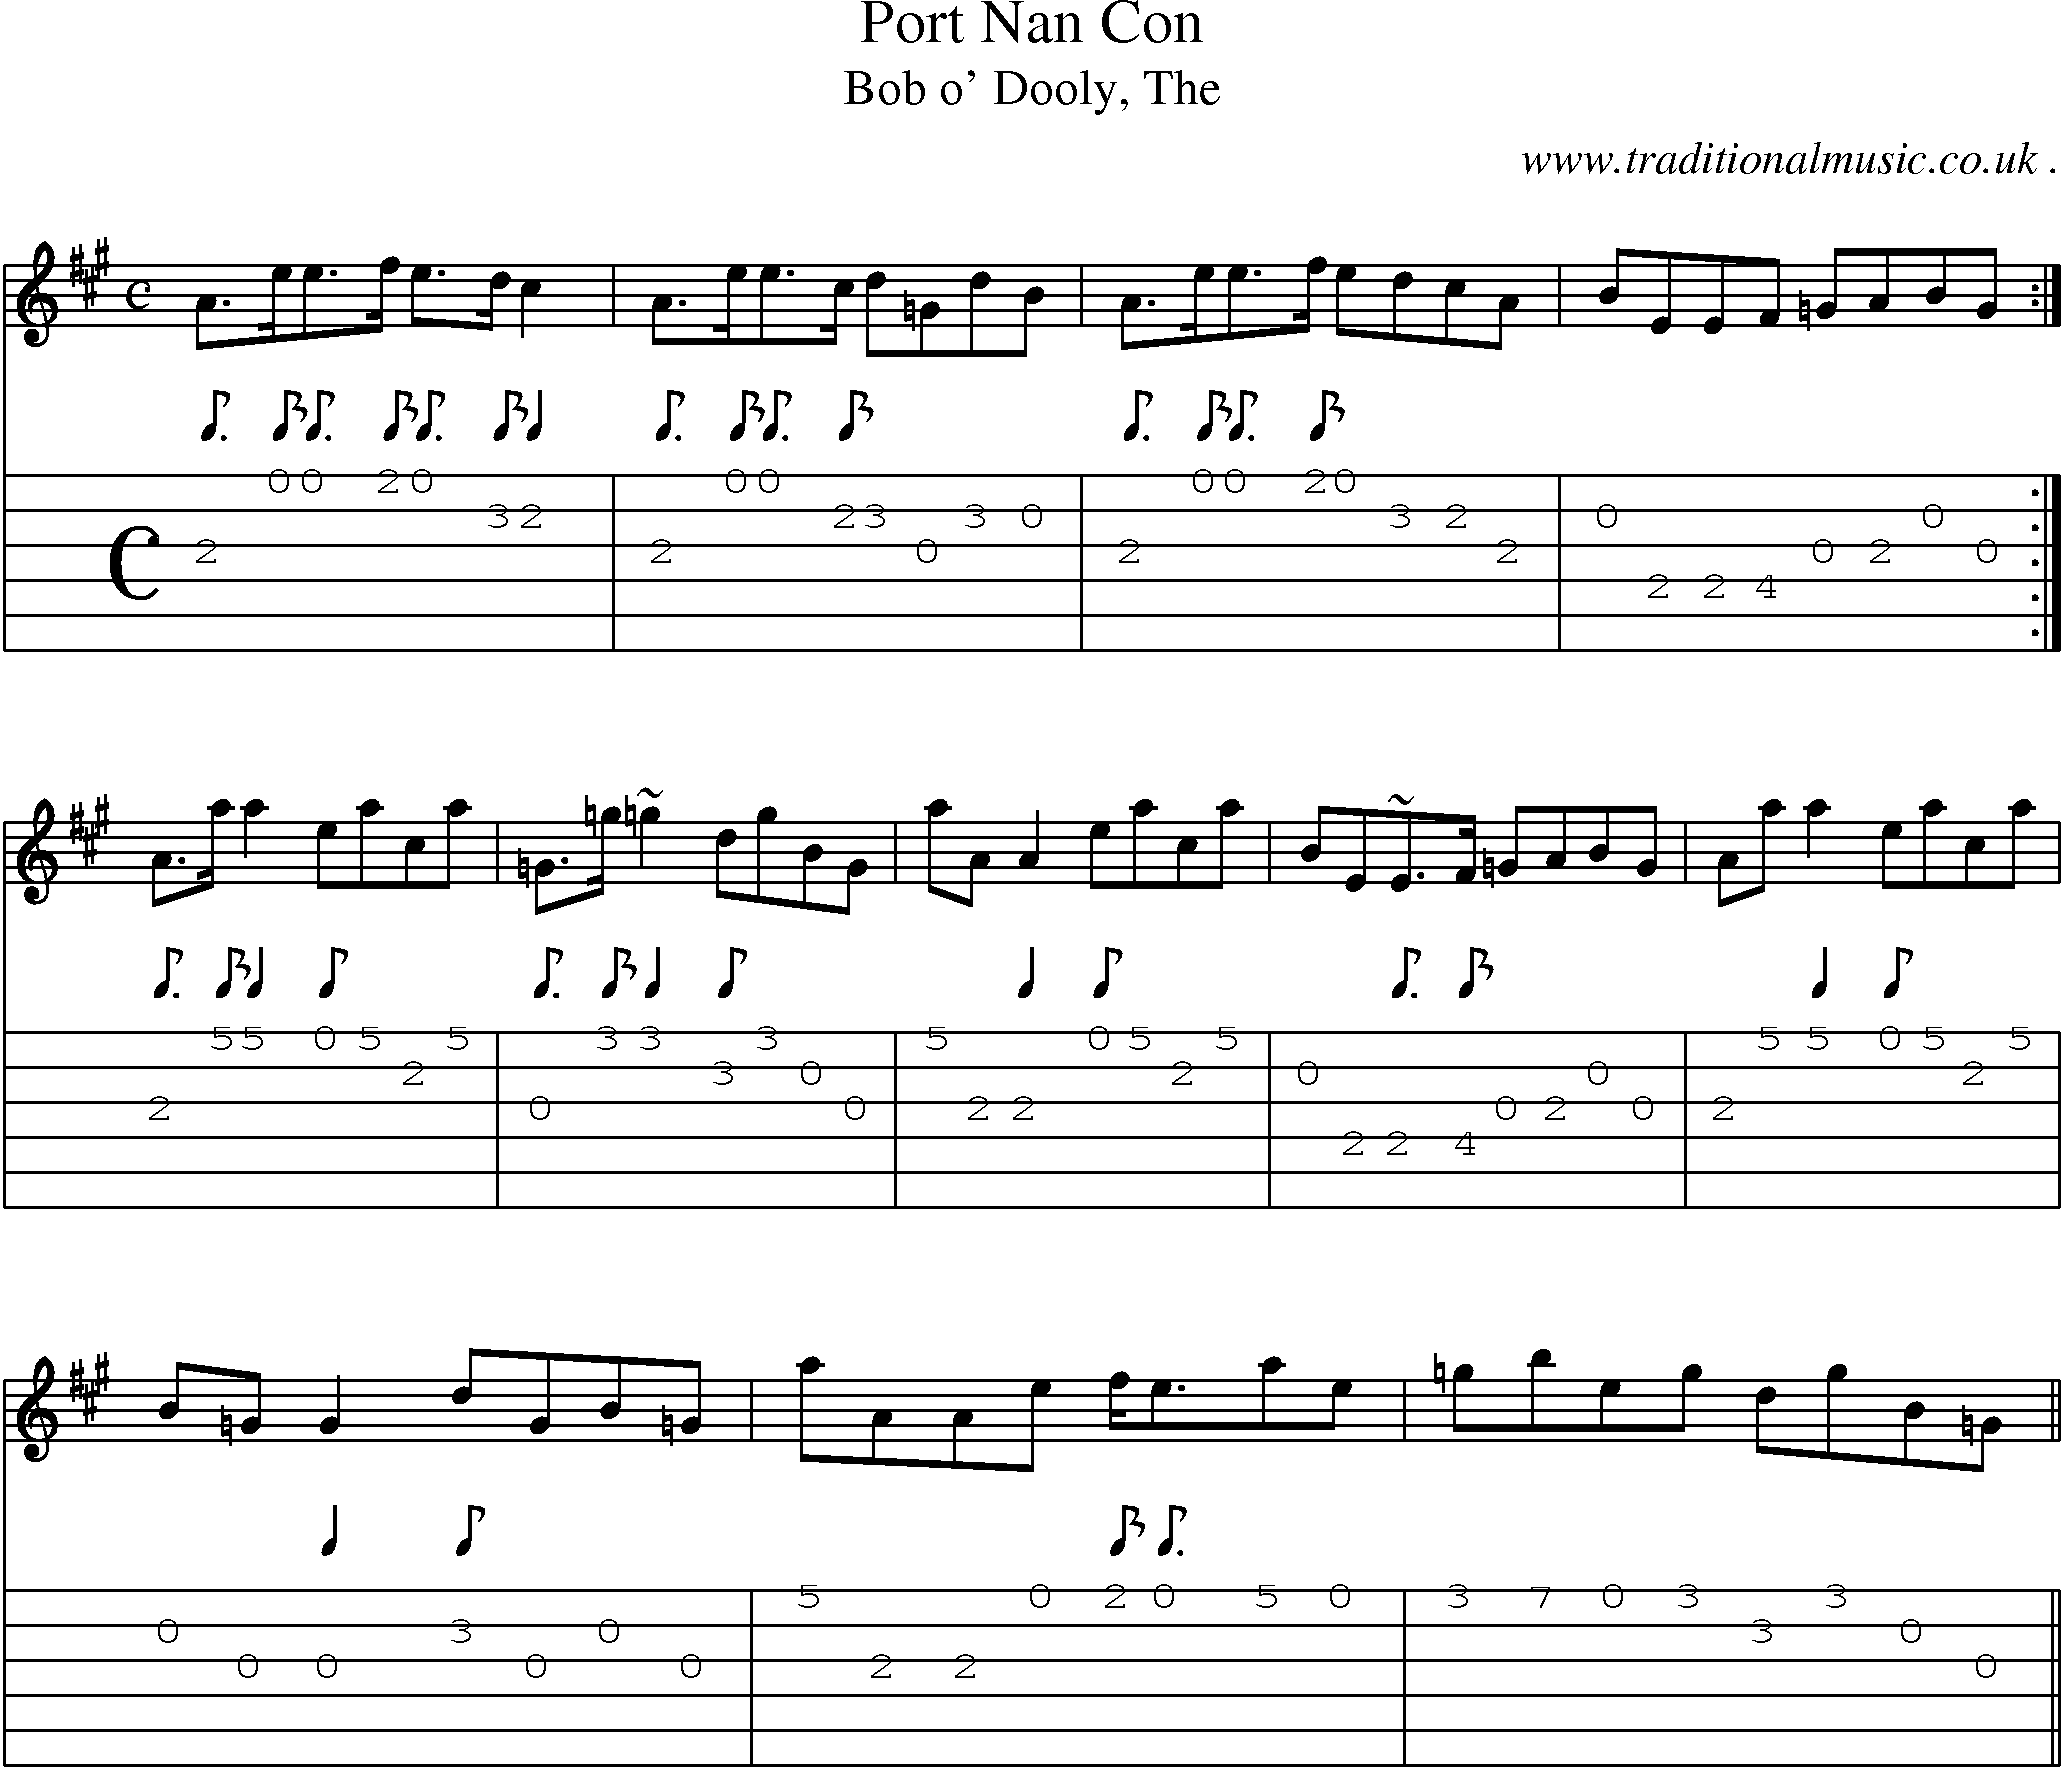 Sheet-music  score, Chords and Guitar Tabs for Port Nan Con